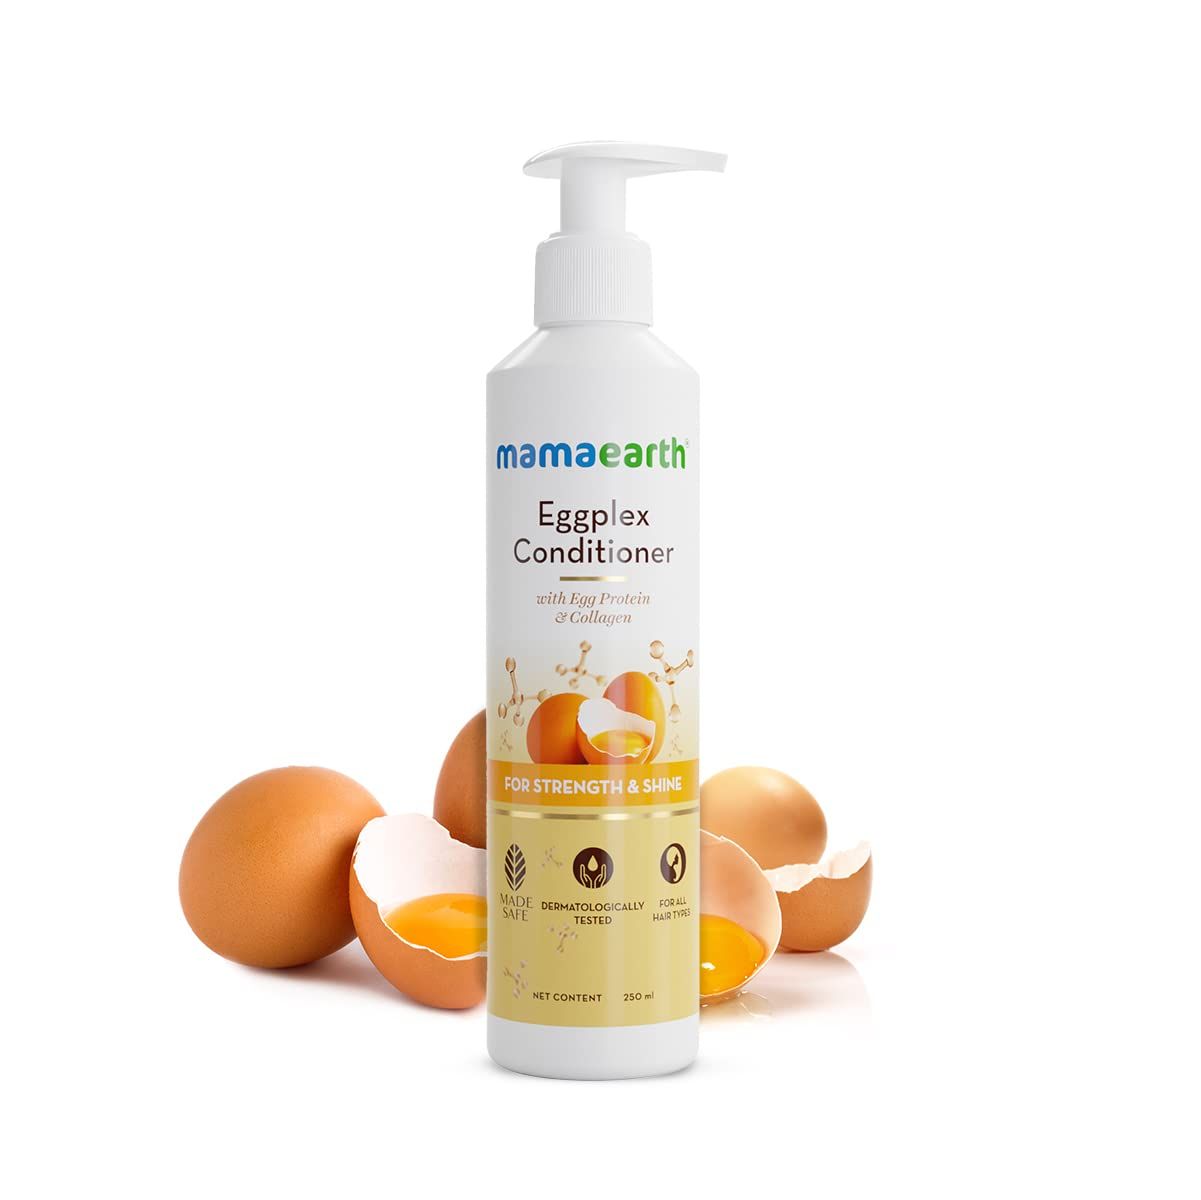 Eggplex Conditioner with Egg Protein & Collagen for Strength & Shine - 250 ml